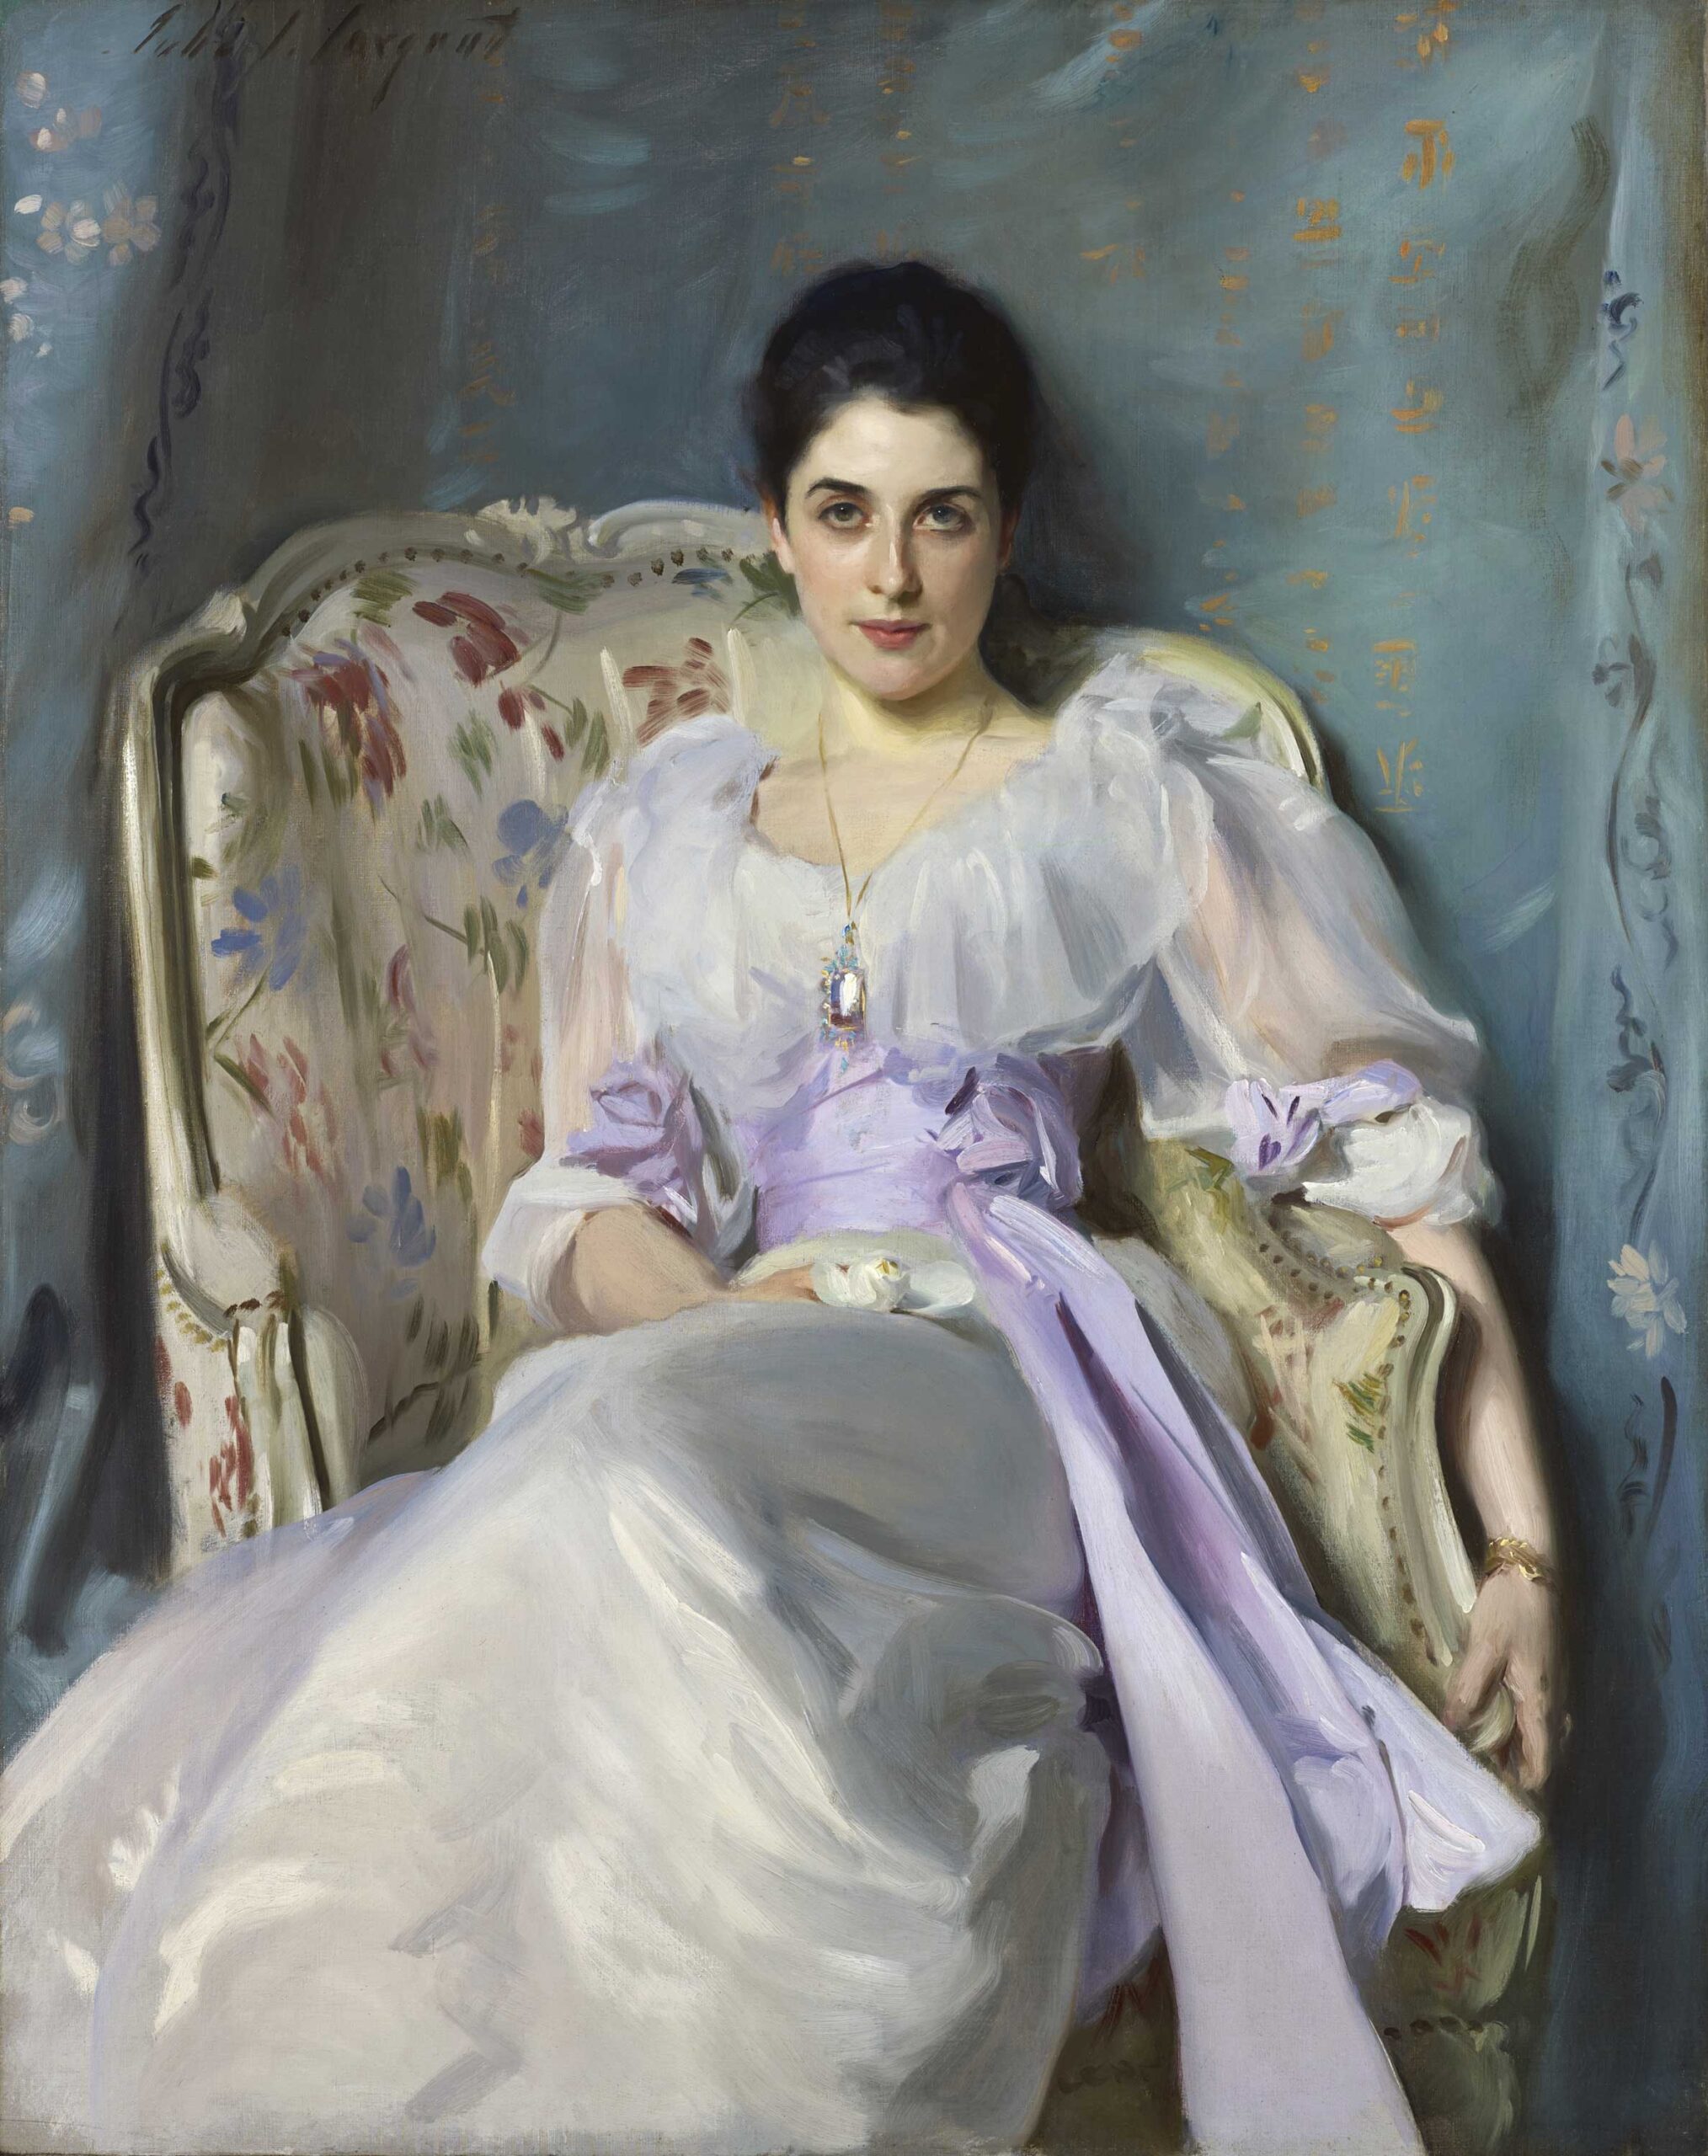 Portrait Painting - John Singer Sargent (1856–1925), "Lady Agnew of Lochnaw," 1892, oil on canvas, 50 x 39 3/4 in.; National Galleries of Scotland, Edinburgh, purchased with the aid of the Cowan Smith Bequest Fund, 1925, NG 1656